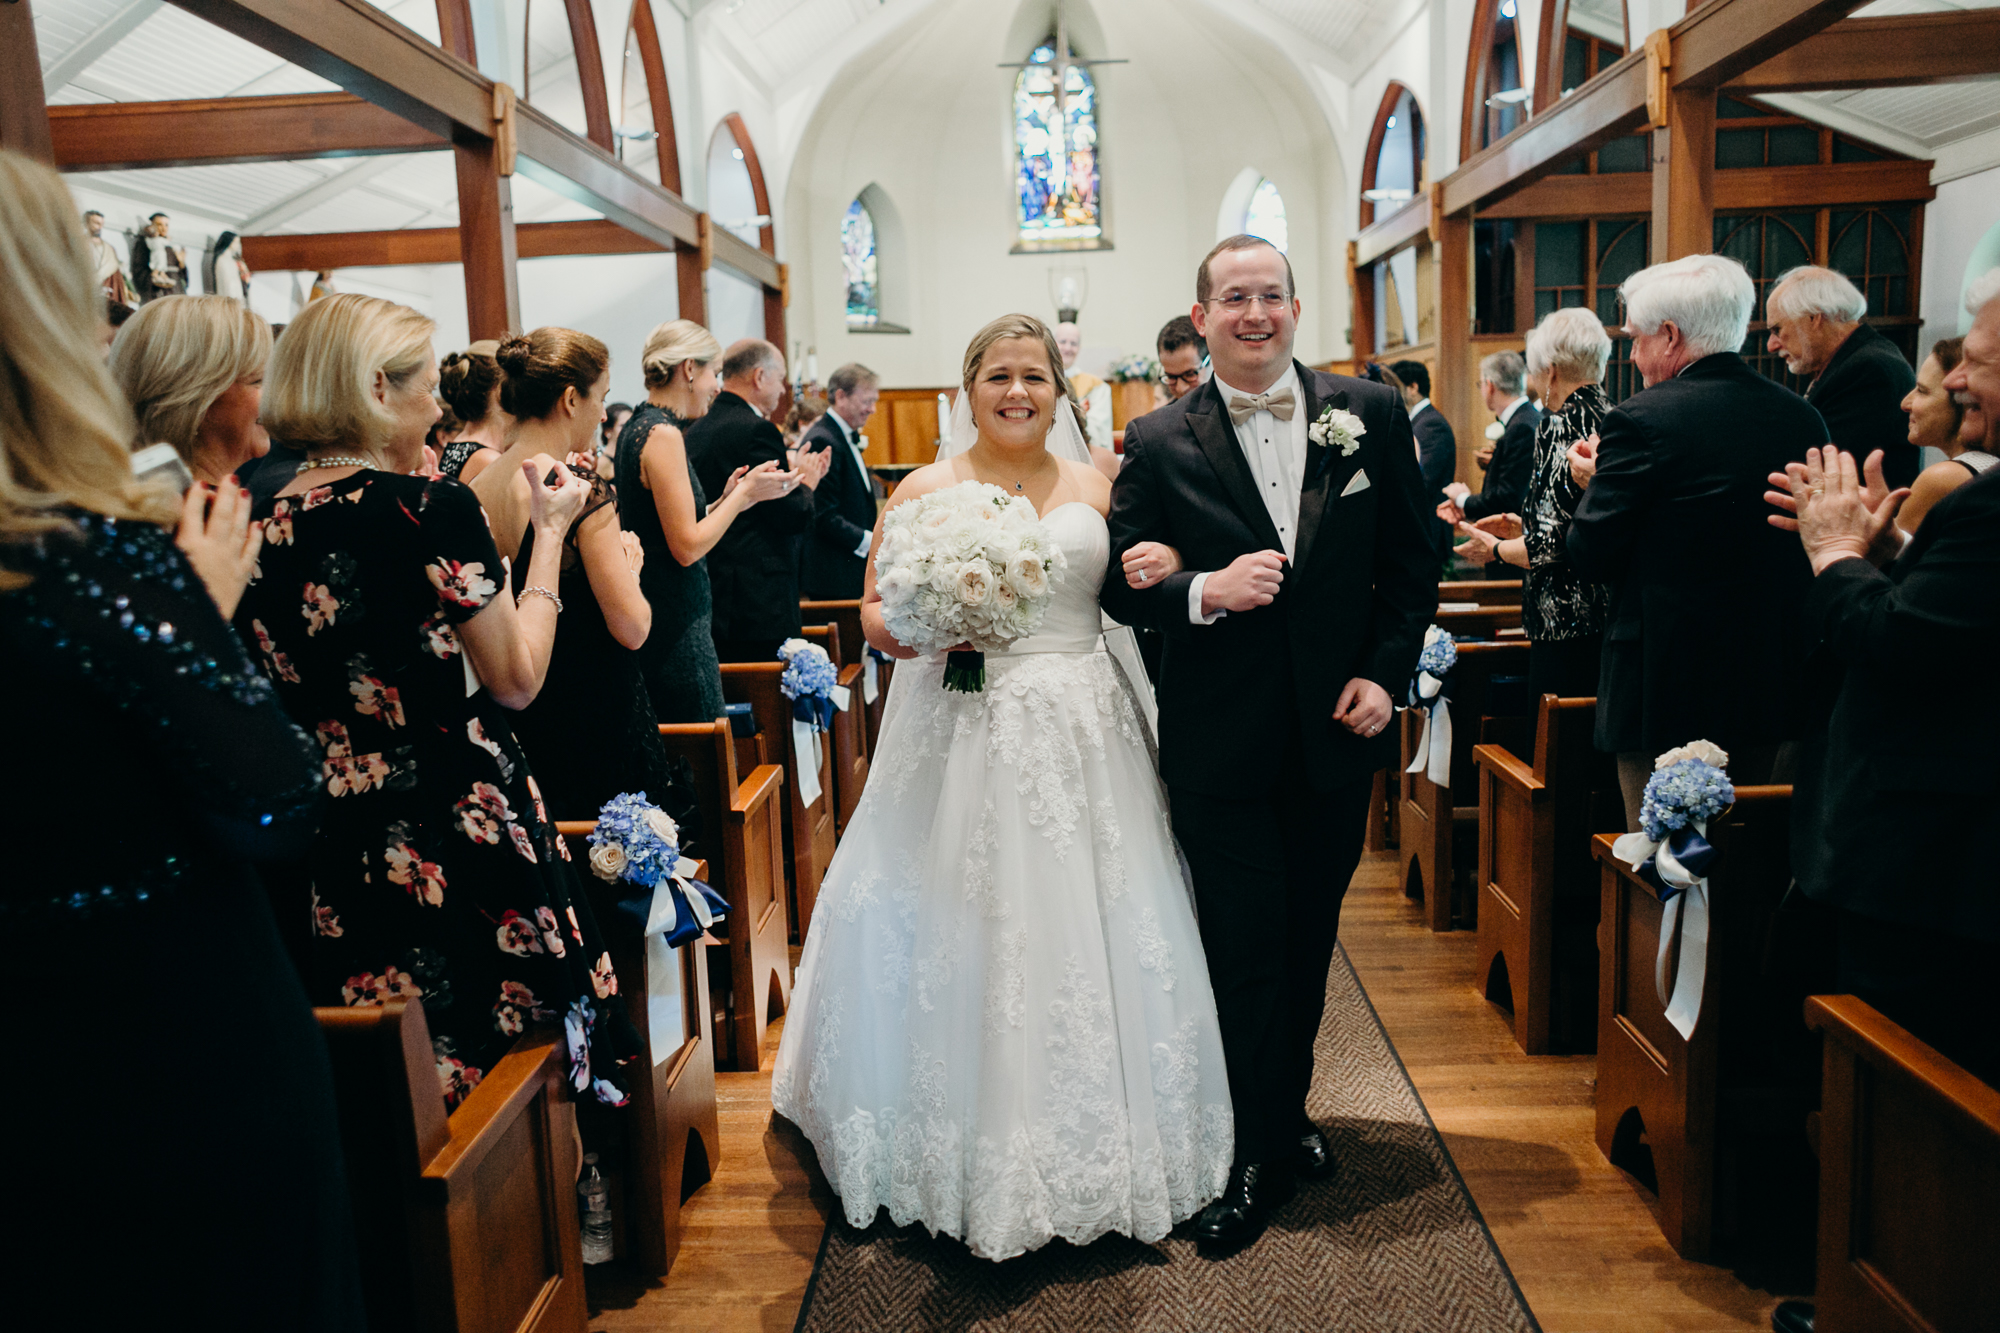 bride and groom celebrate during their wedding ceremony at country club of darien in darien, connecticut